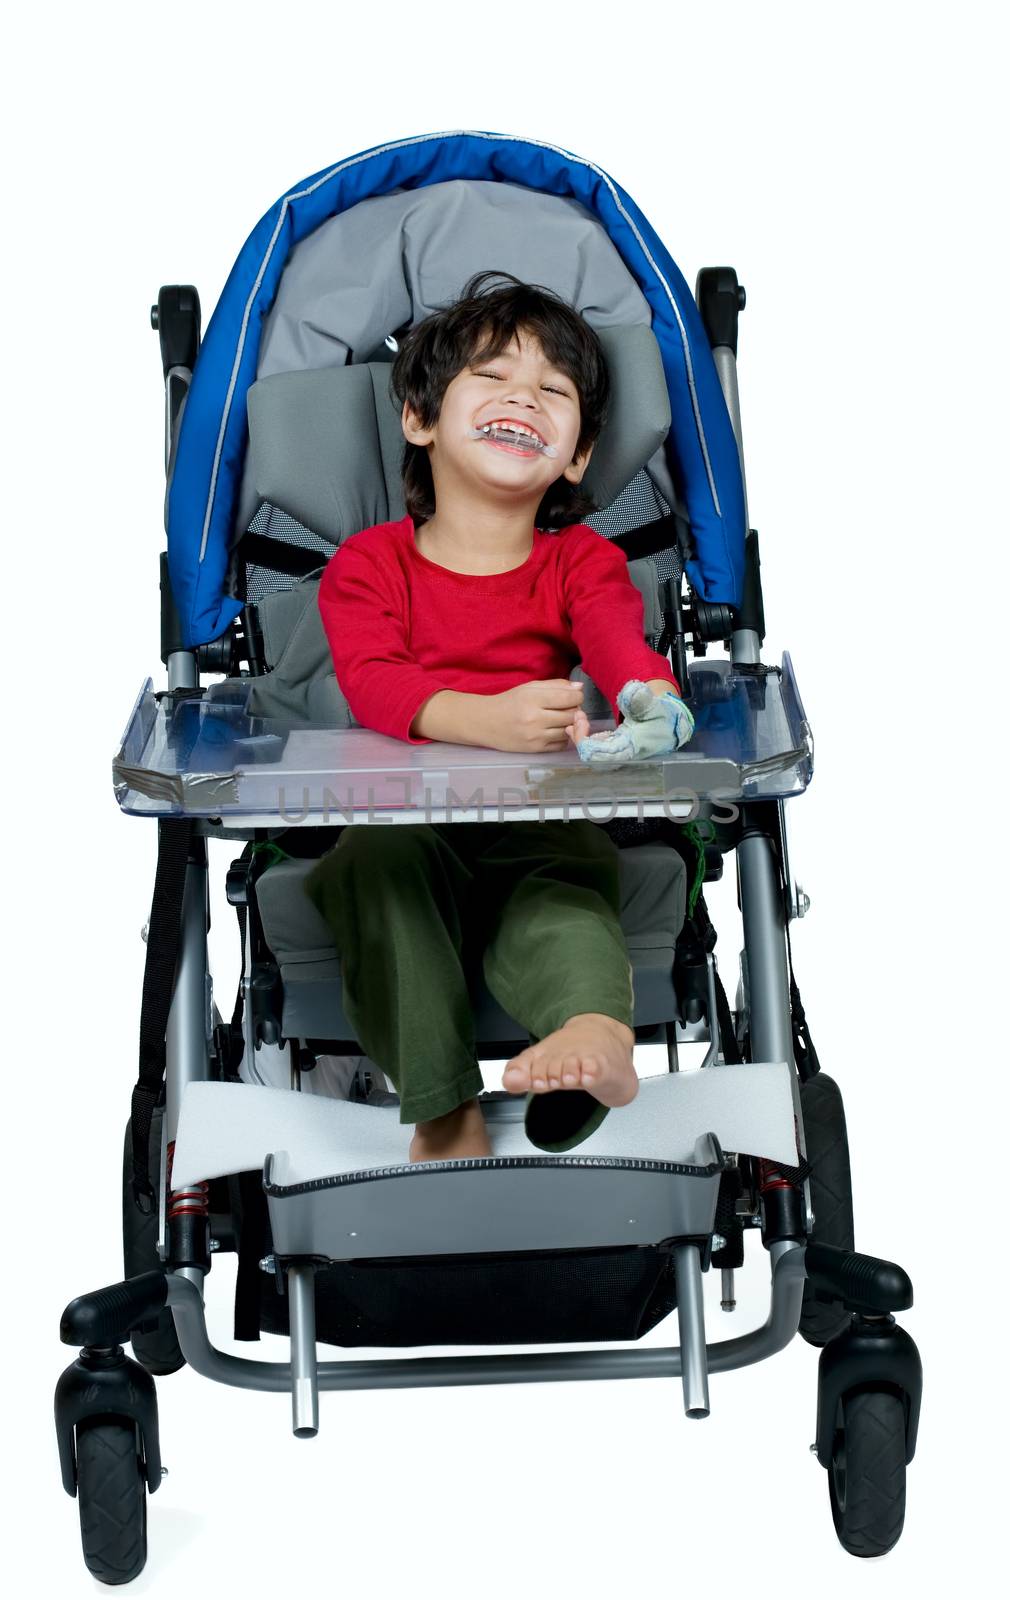 Three year old biracial disabled boy in medical stroller, happy and smiling